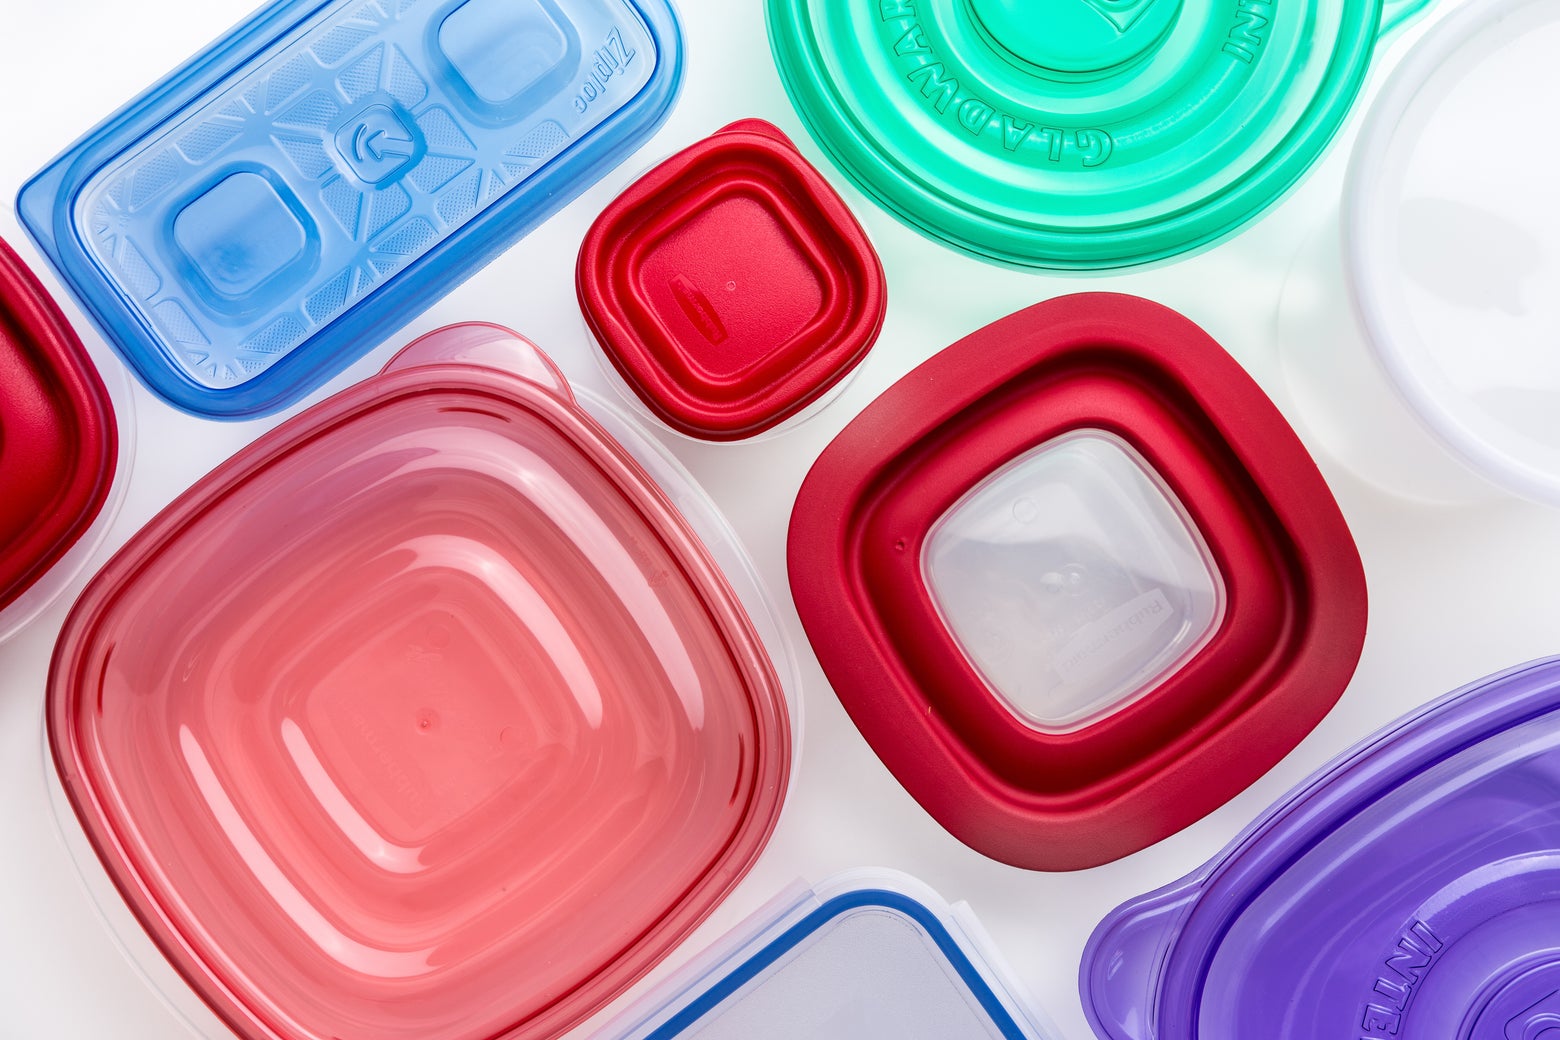 This New $10 Tupperware Bowl At Target Keeps Food Fresher Than